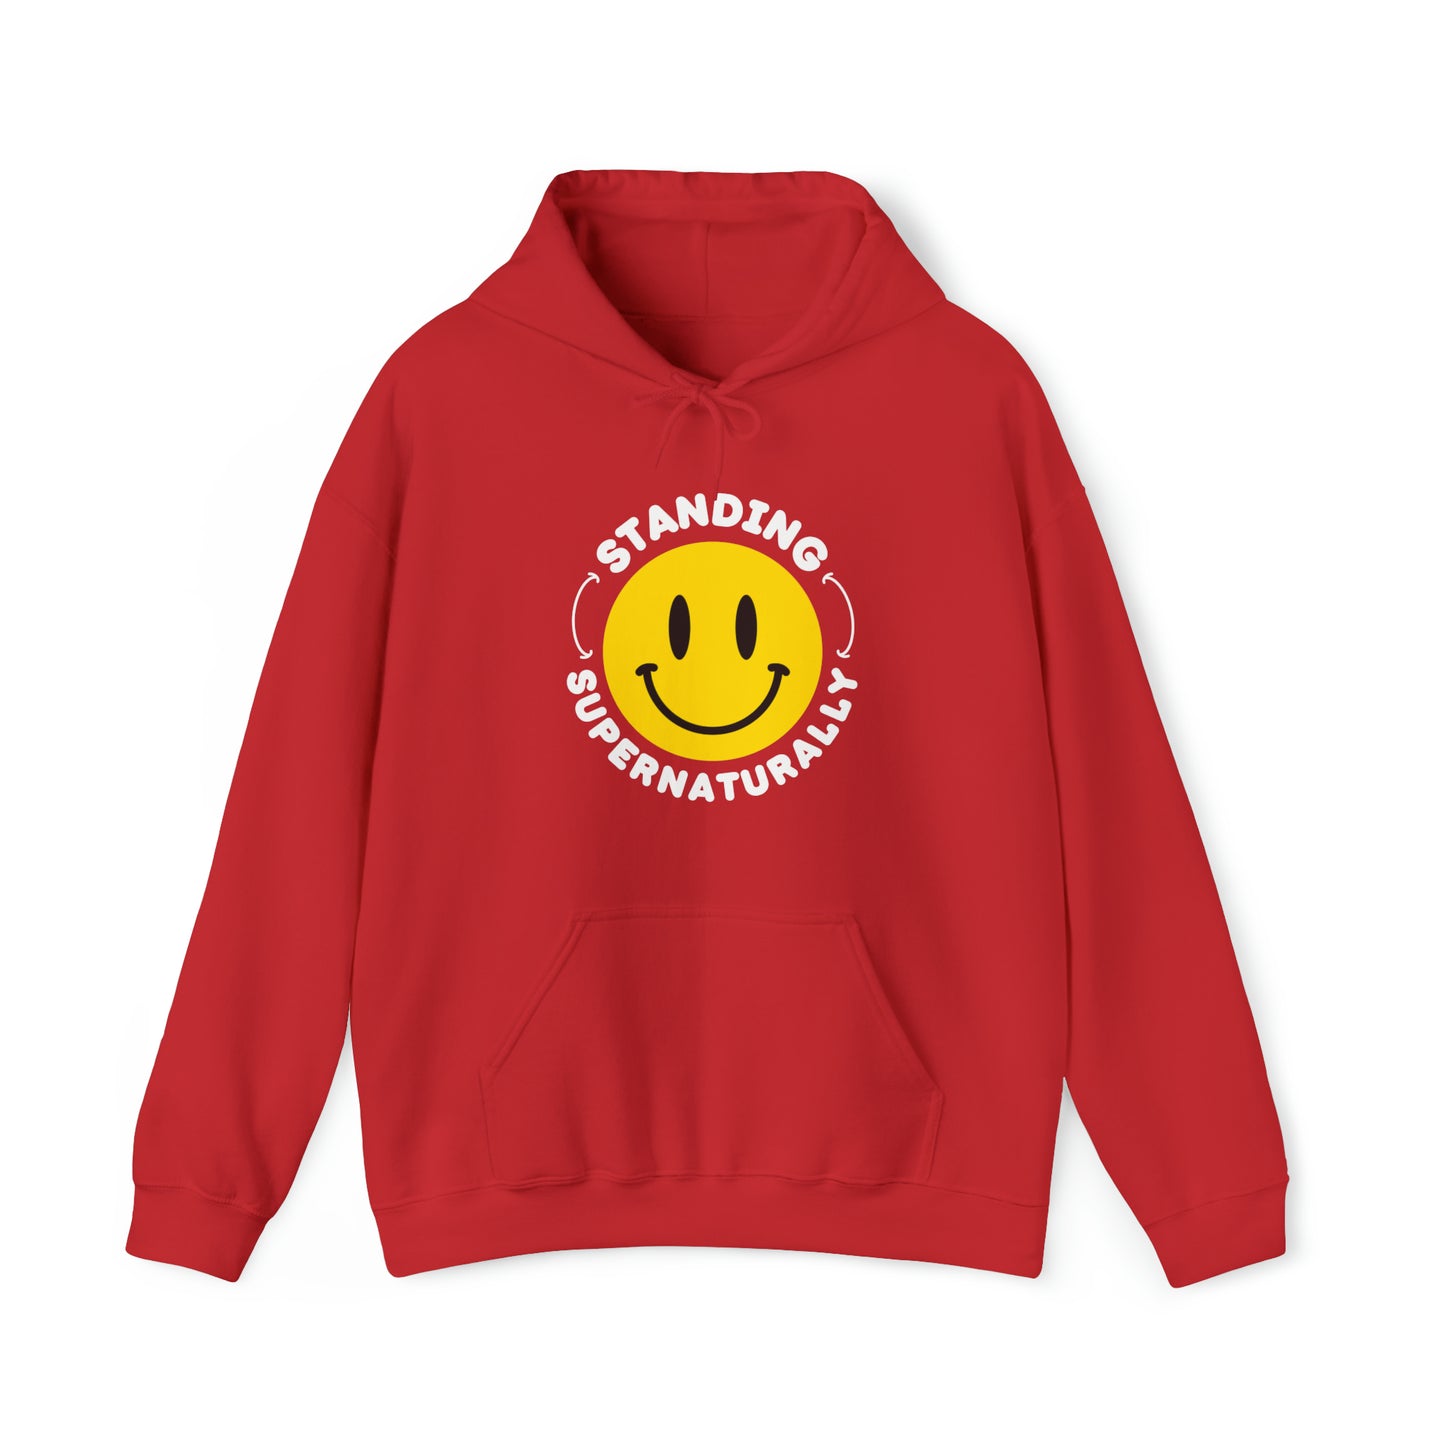 "Smile" - Hoodie (Light Blue, Black & Red Available)